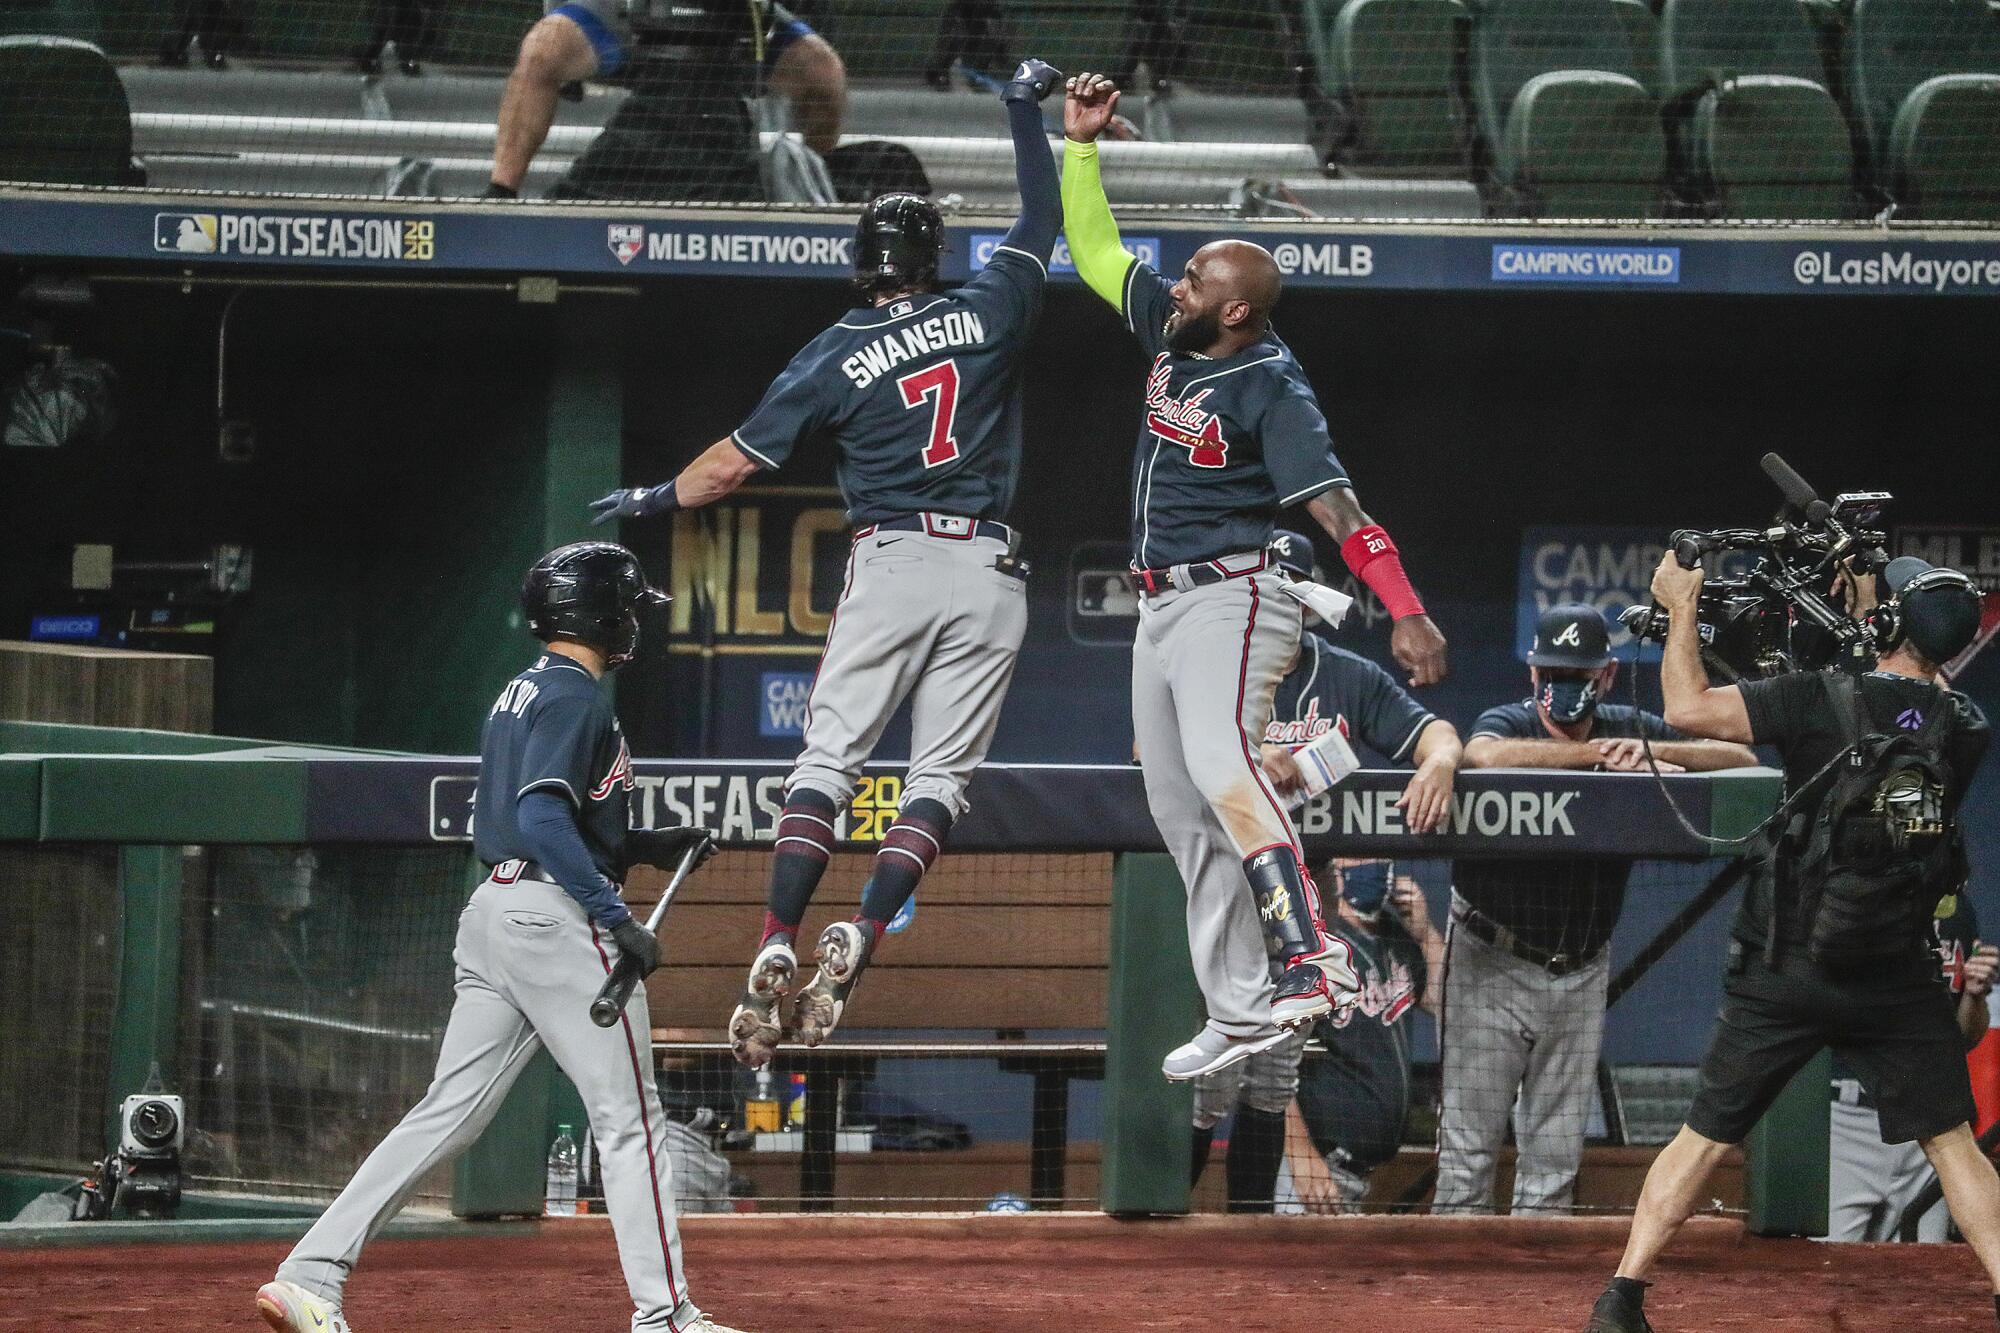 Marcell Ozuna and Dansby Swanson leap into the air for a forearm bump.